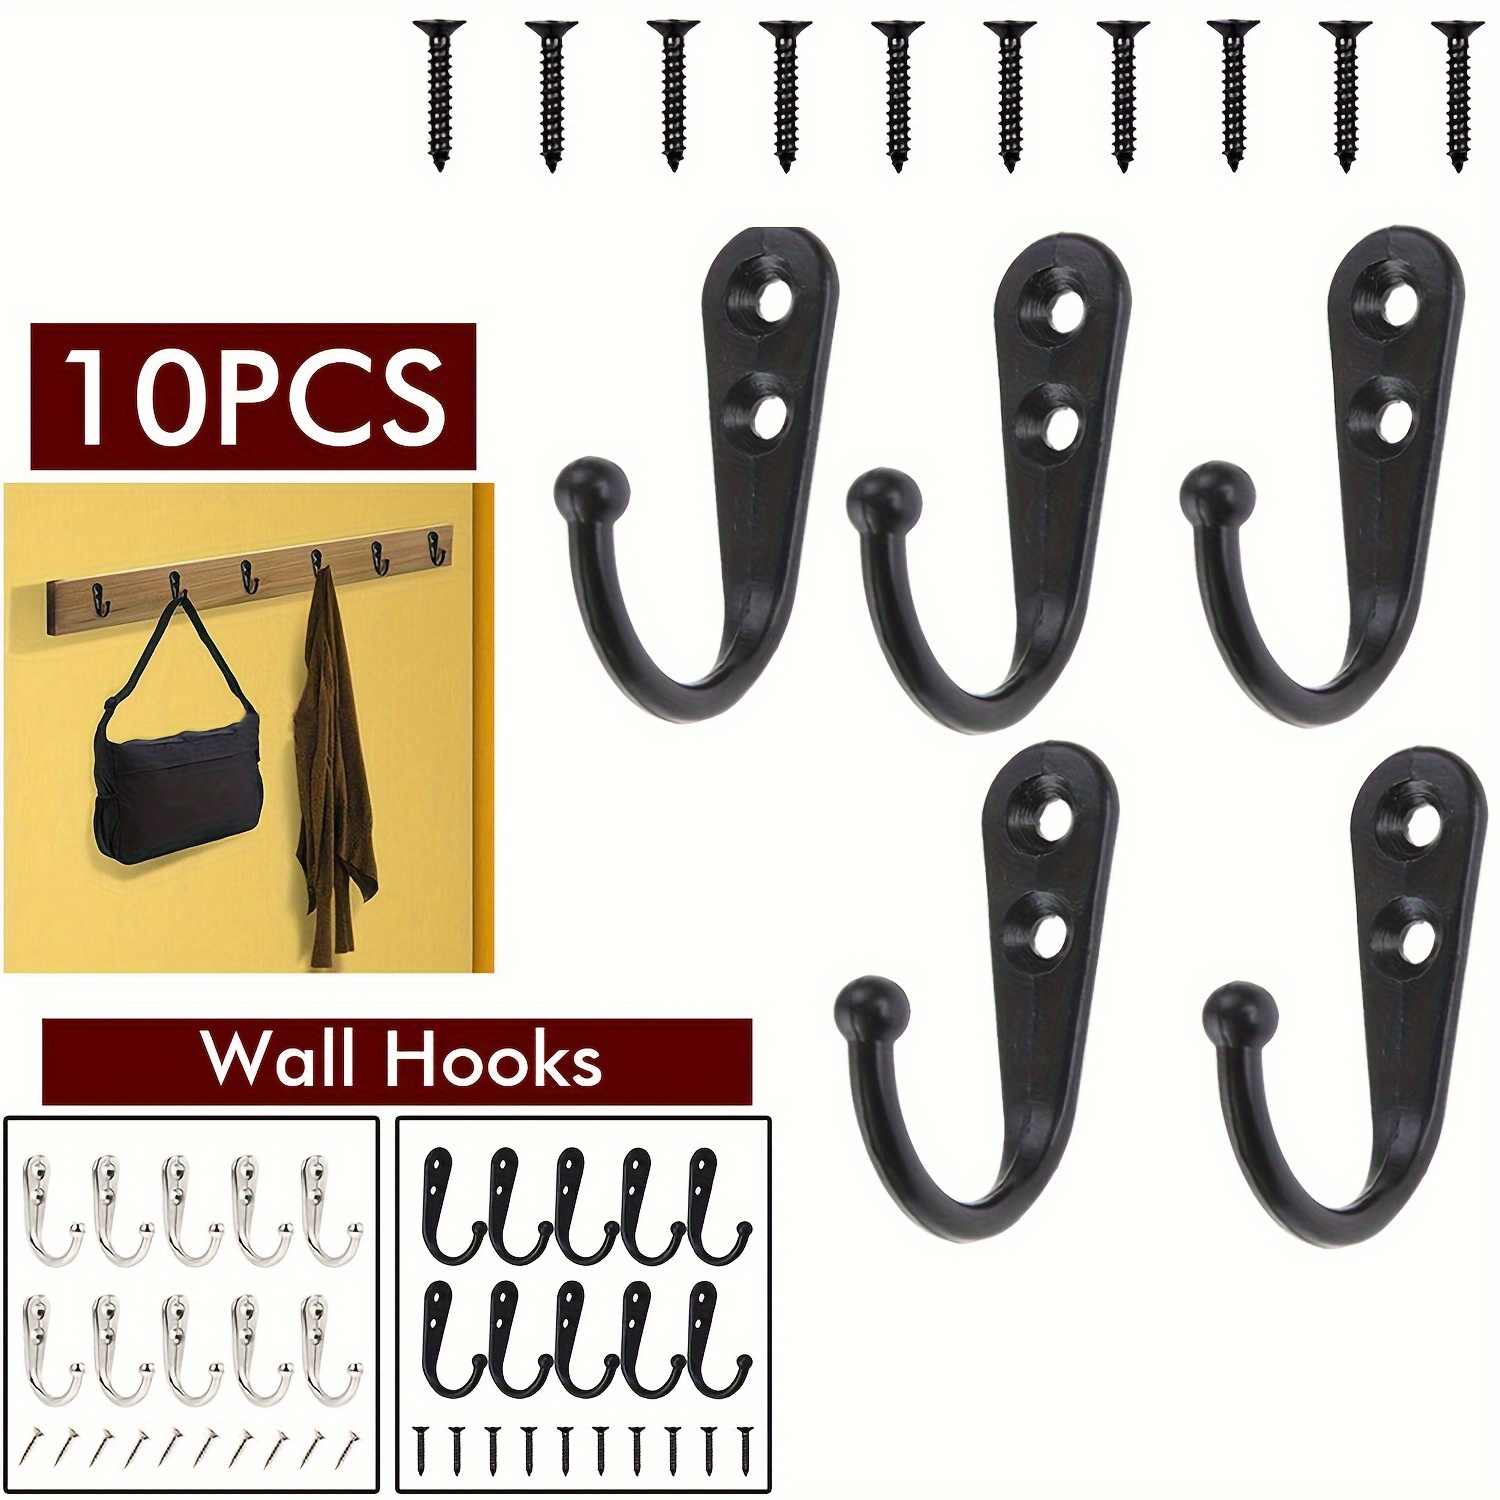 10pcs Stainless Steel Heavy Duty Wall Hooks For Towels And Clothes -  Antique Closet Hooks For Bedroom, Cloakroom Door - Single Hook For Small  Items, W